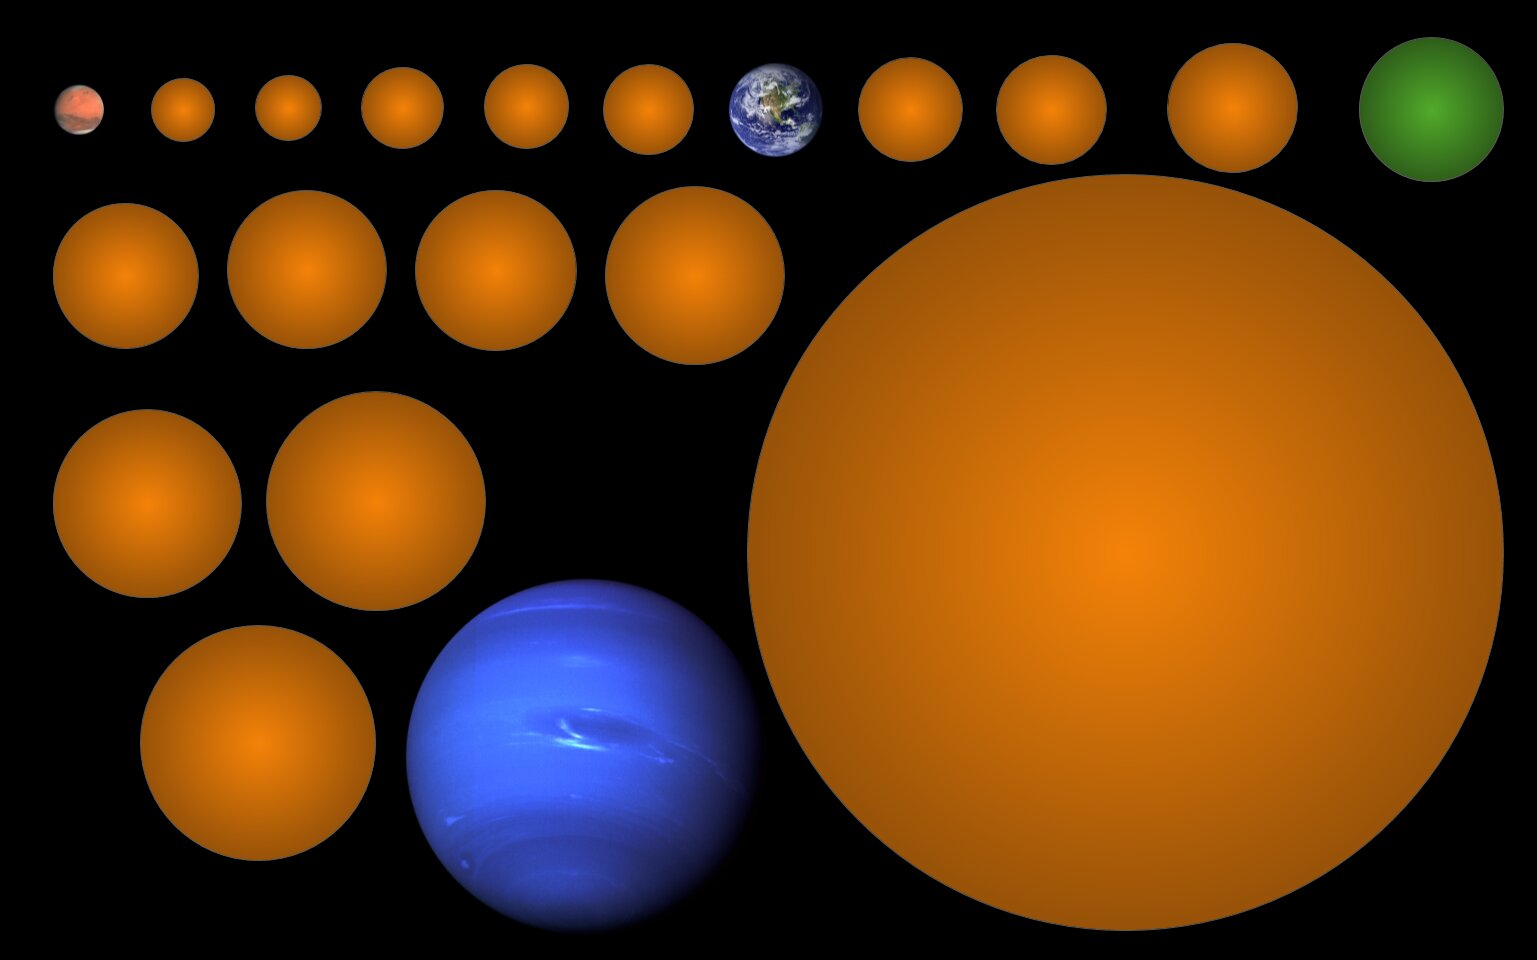 Discovery of 17 New Planets, Including an Earth-sized World, by Astronomy Student